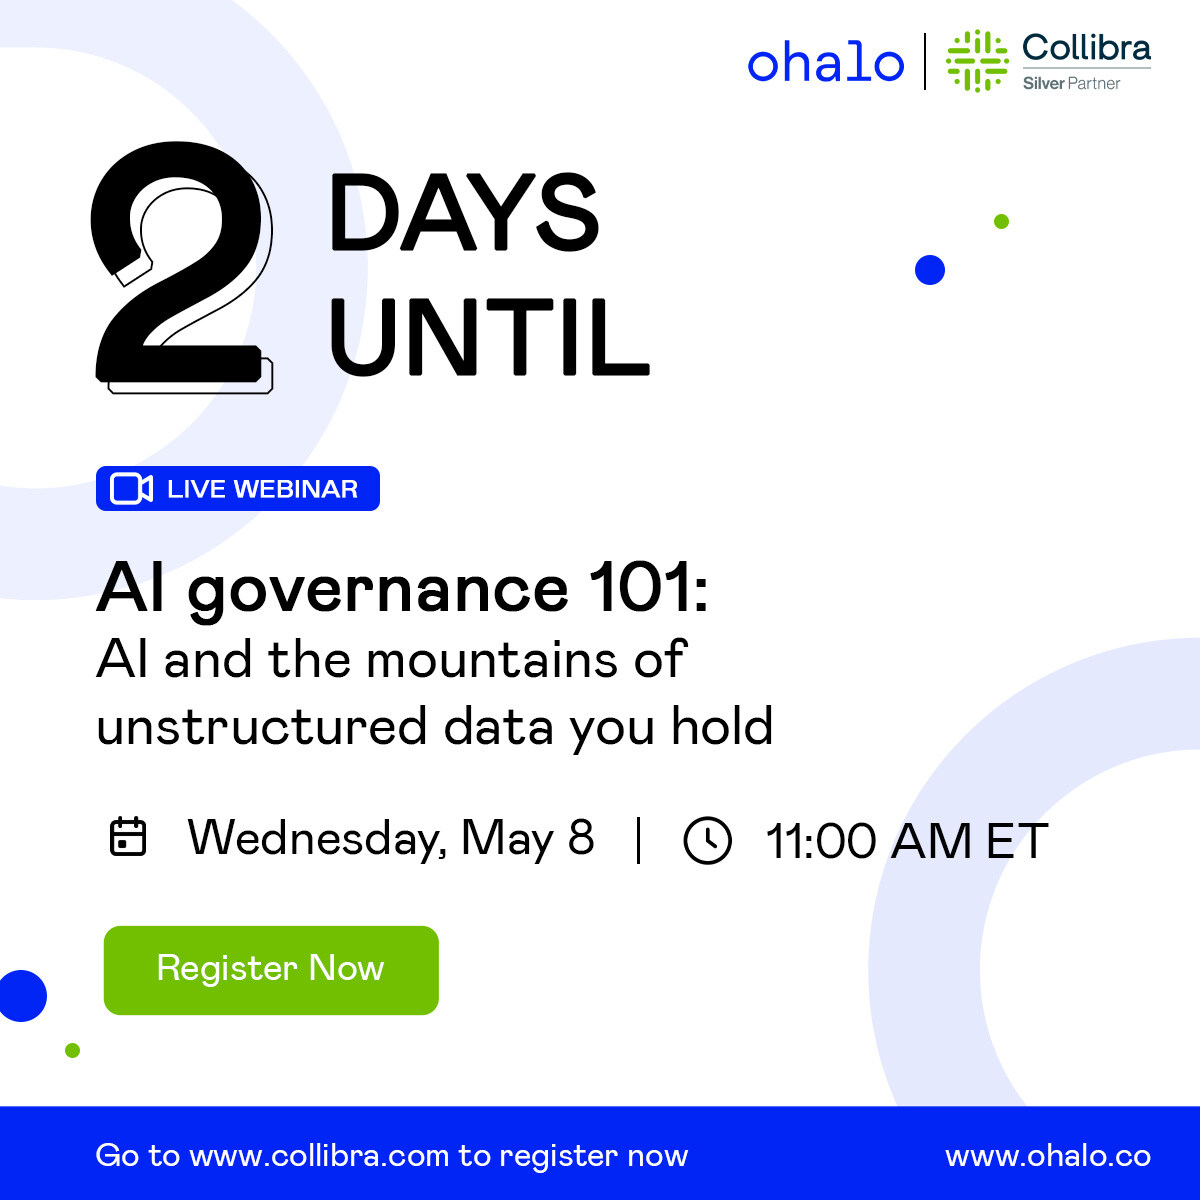 ⏳ Just 2 days left until the AI Governance 101 event!
Don't miss your chance to join our CEO, Kyle DuPont, for a deep dive into effective #DataGovernance strategies.

🔗 Finalize your plans and register now: hubs.la/Q02vQqP10

#AIGovernance #DataManagement #Countdown